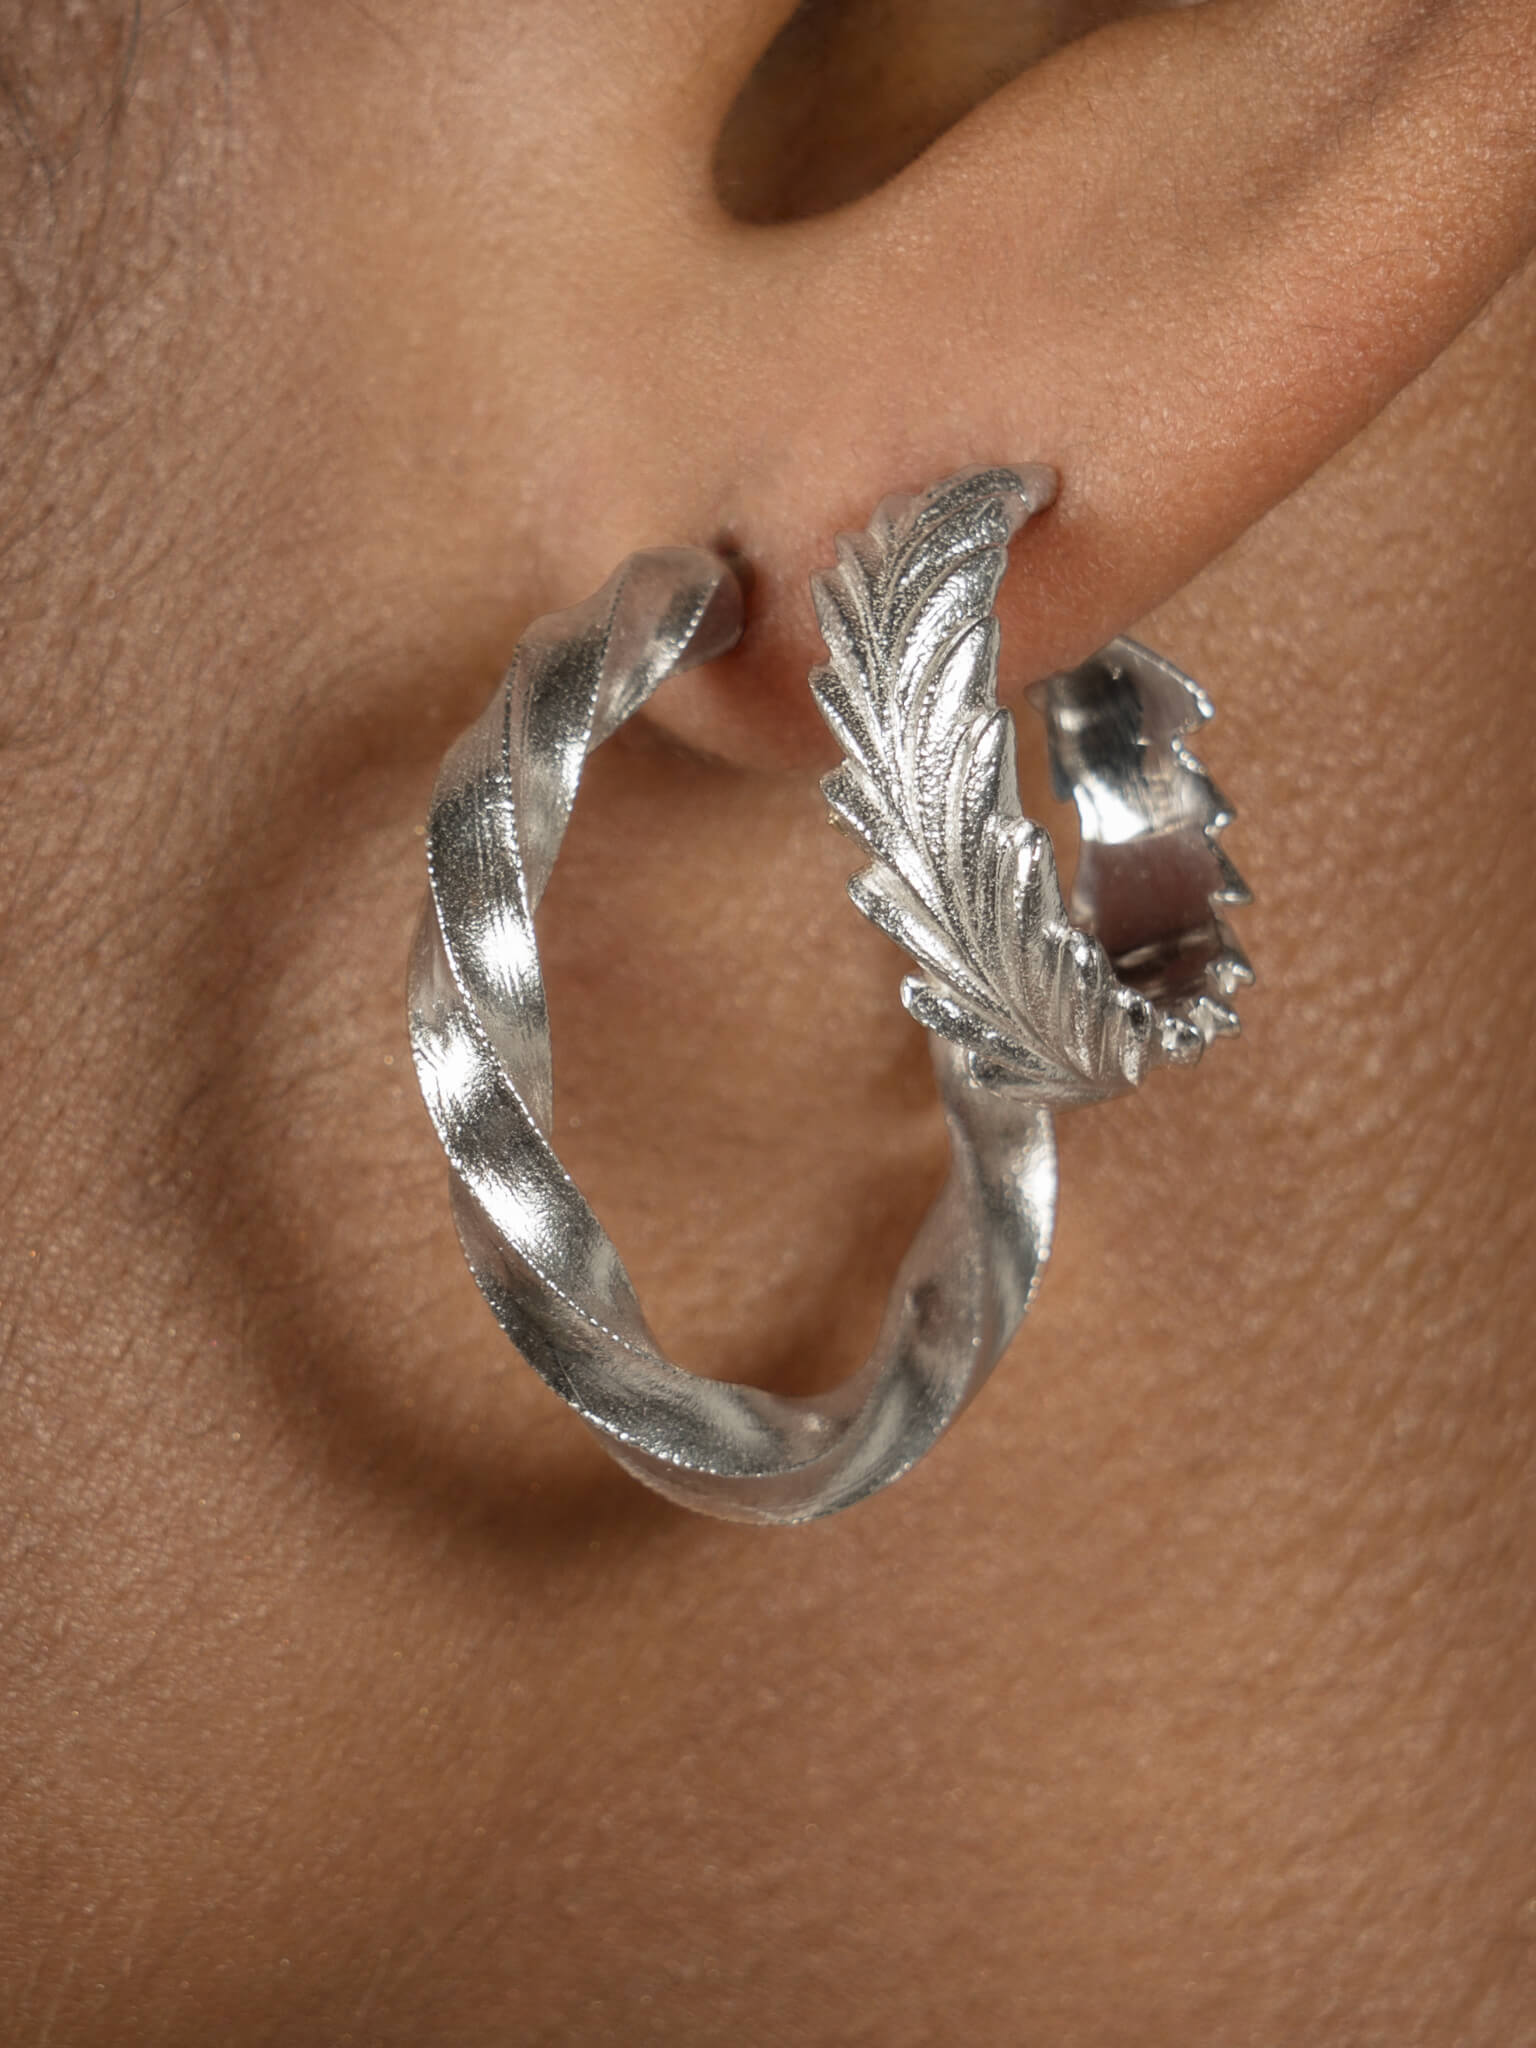 A close up of a woman's ear with a pair of Cremilde Bispo Jewellery Essential Leaf Hoops in silver, adding maximum style with minimal effort.